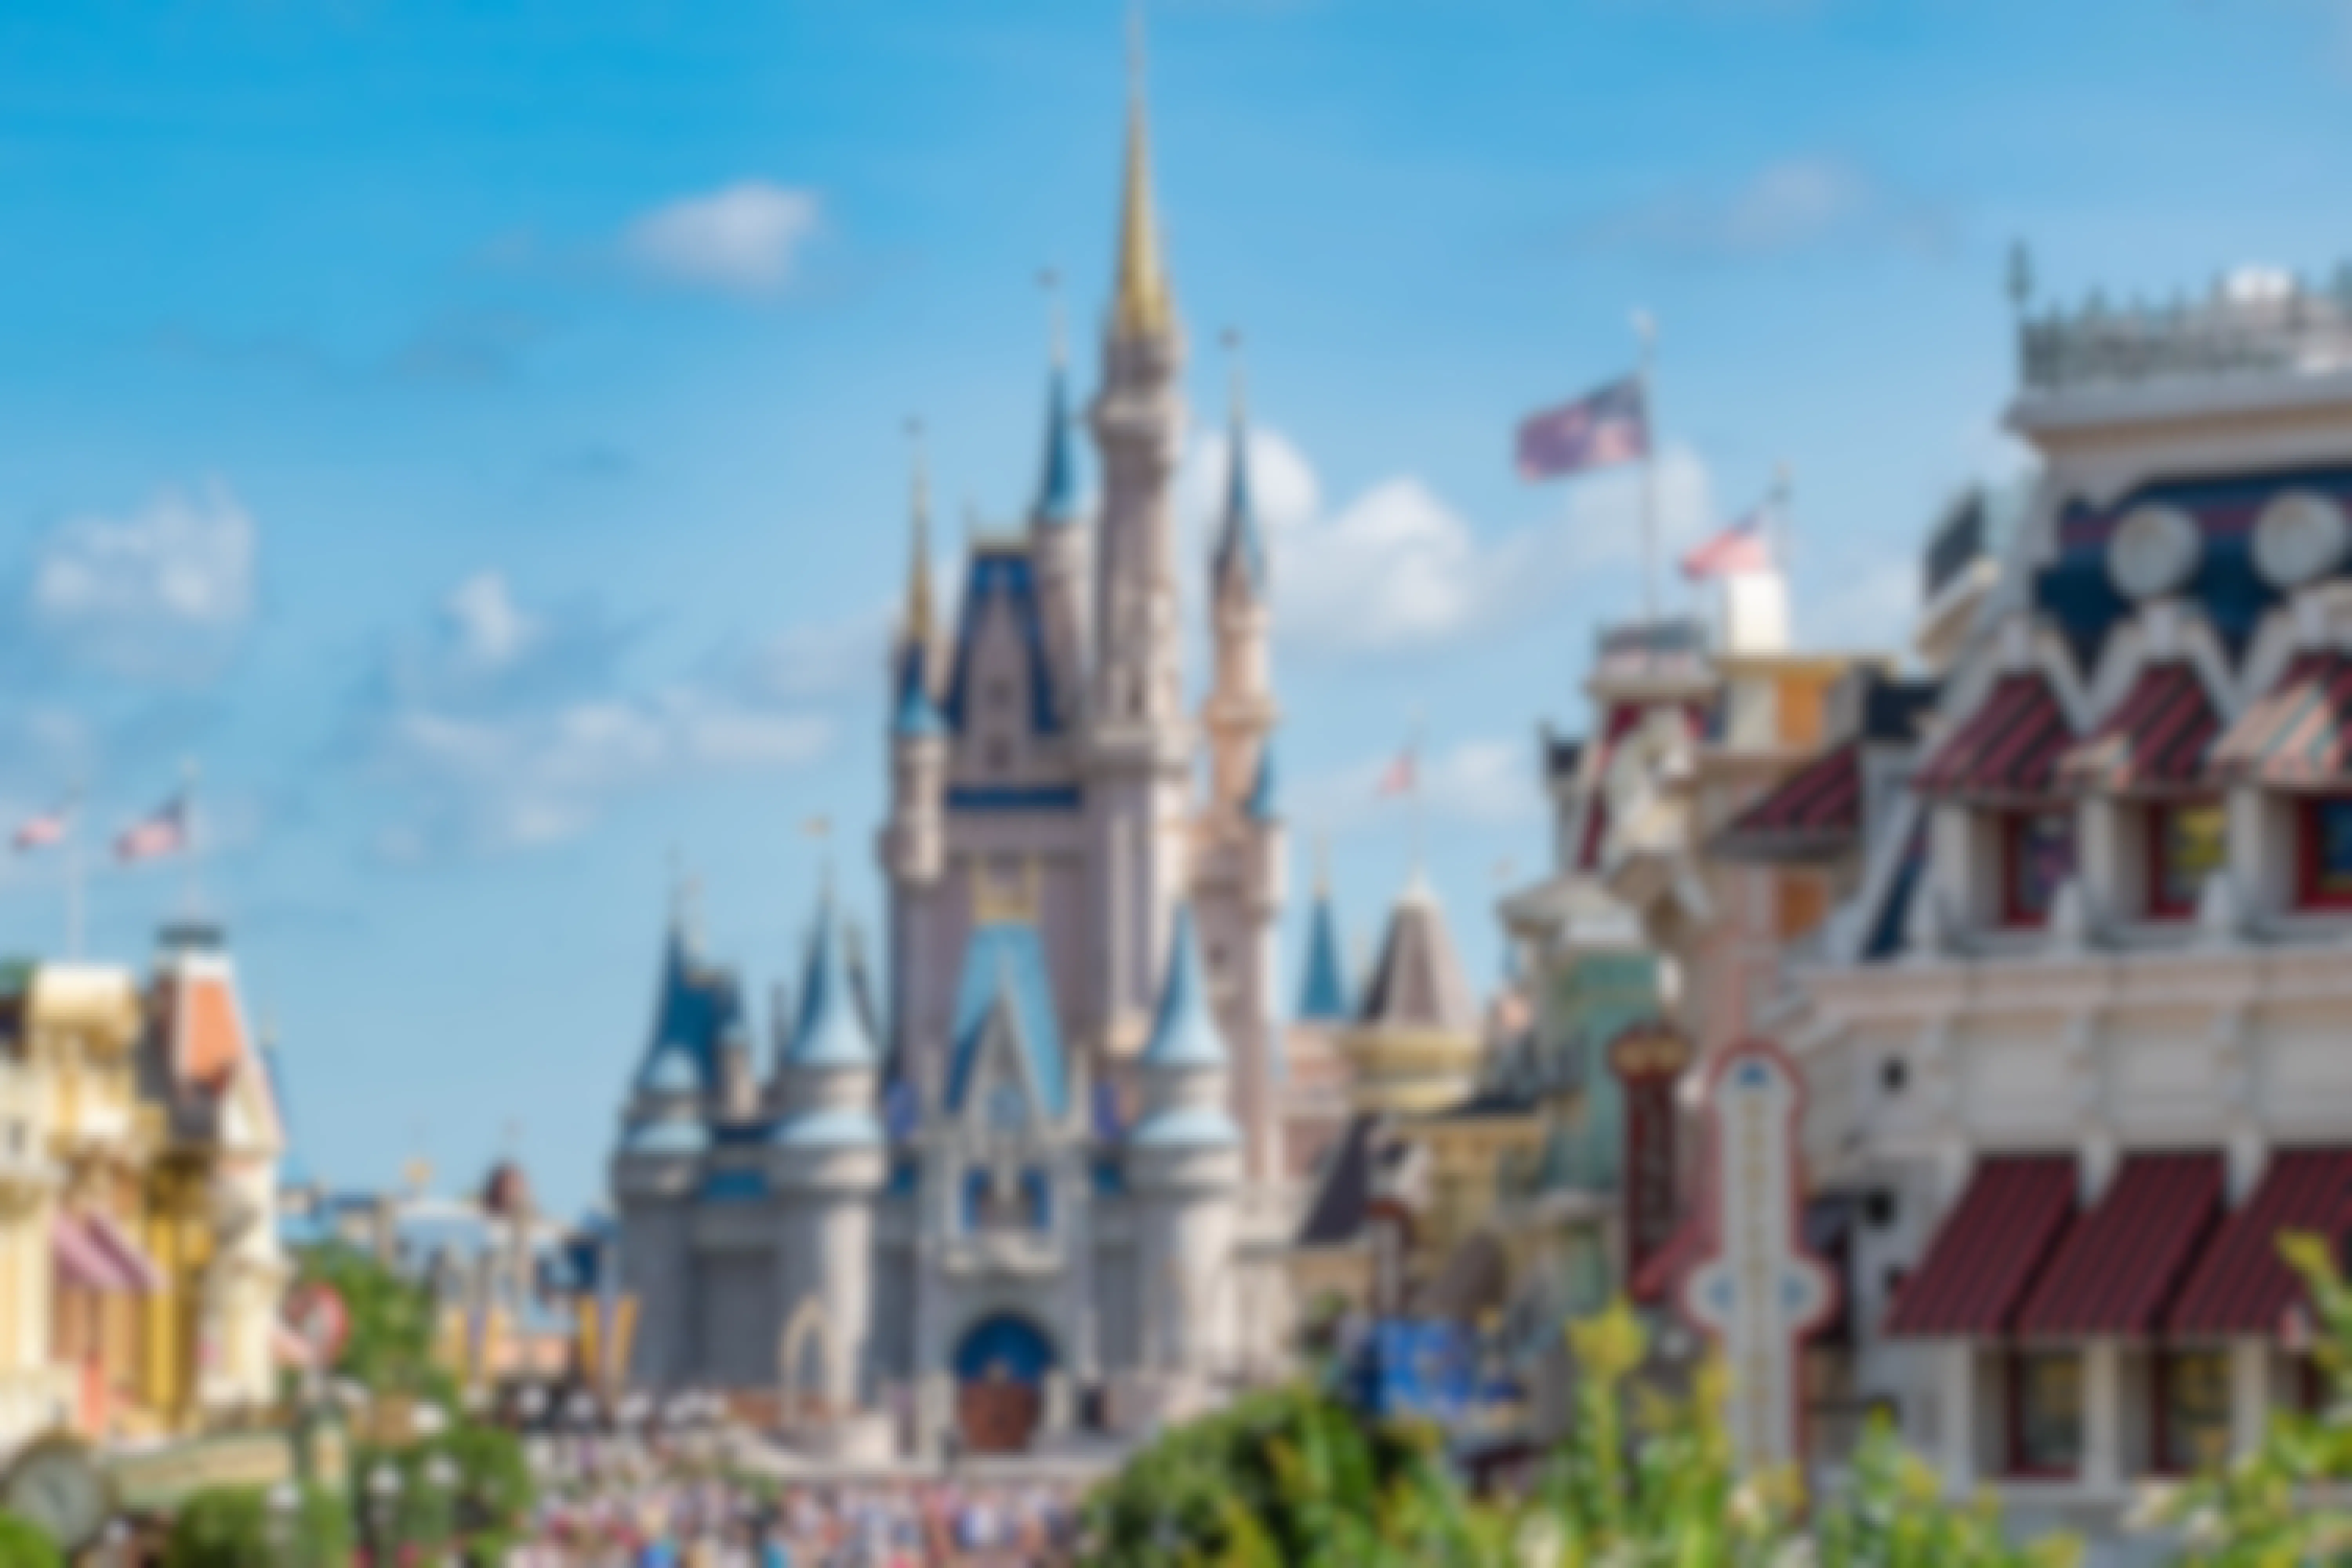 Disney World Reopening Date & Plans Announced for This Summer